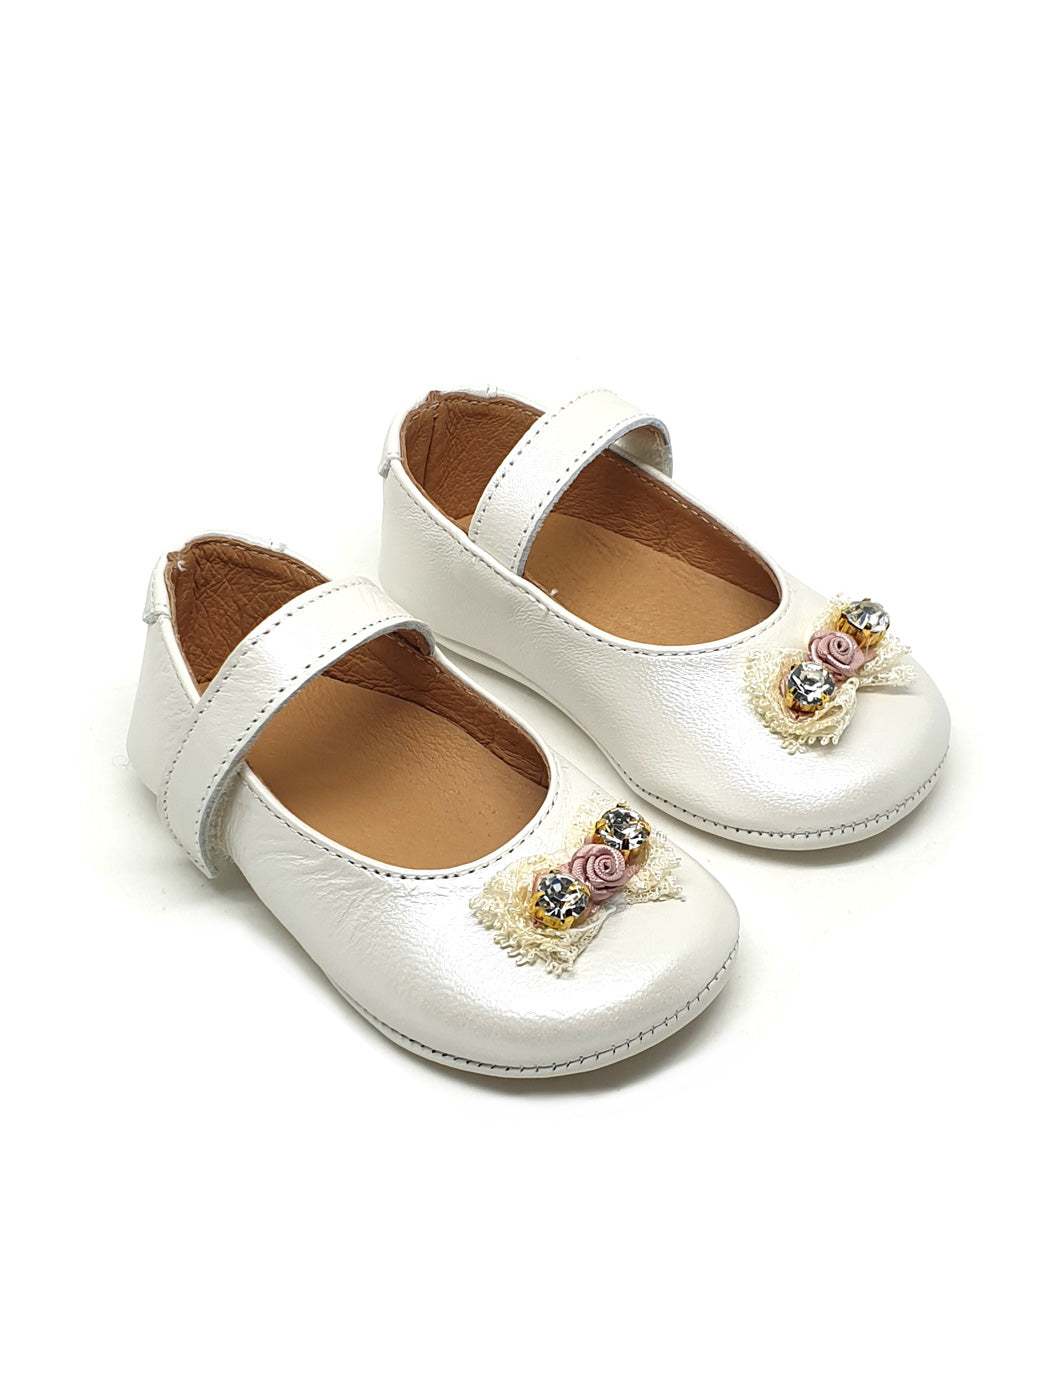 Leather Pre-Walker Shoes for baby-PR-M259-Cream